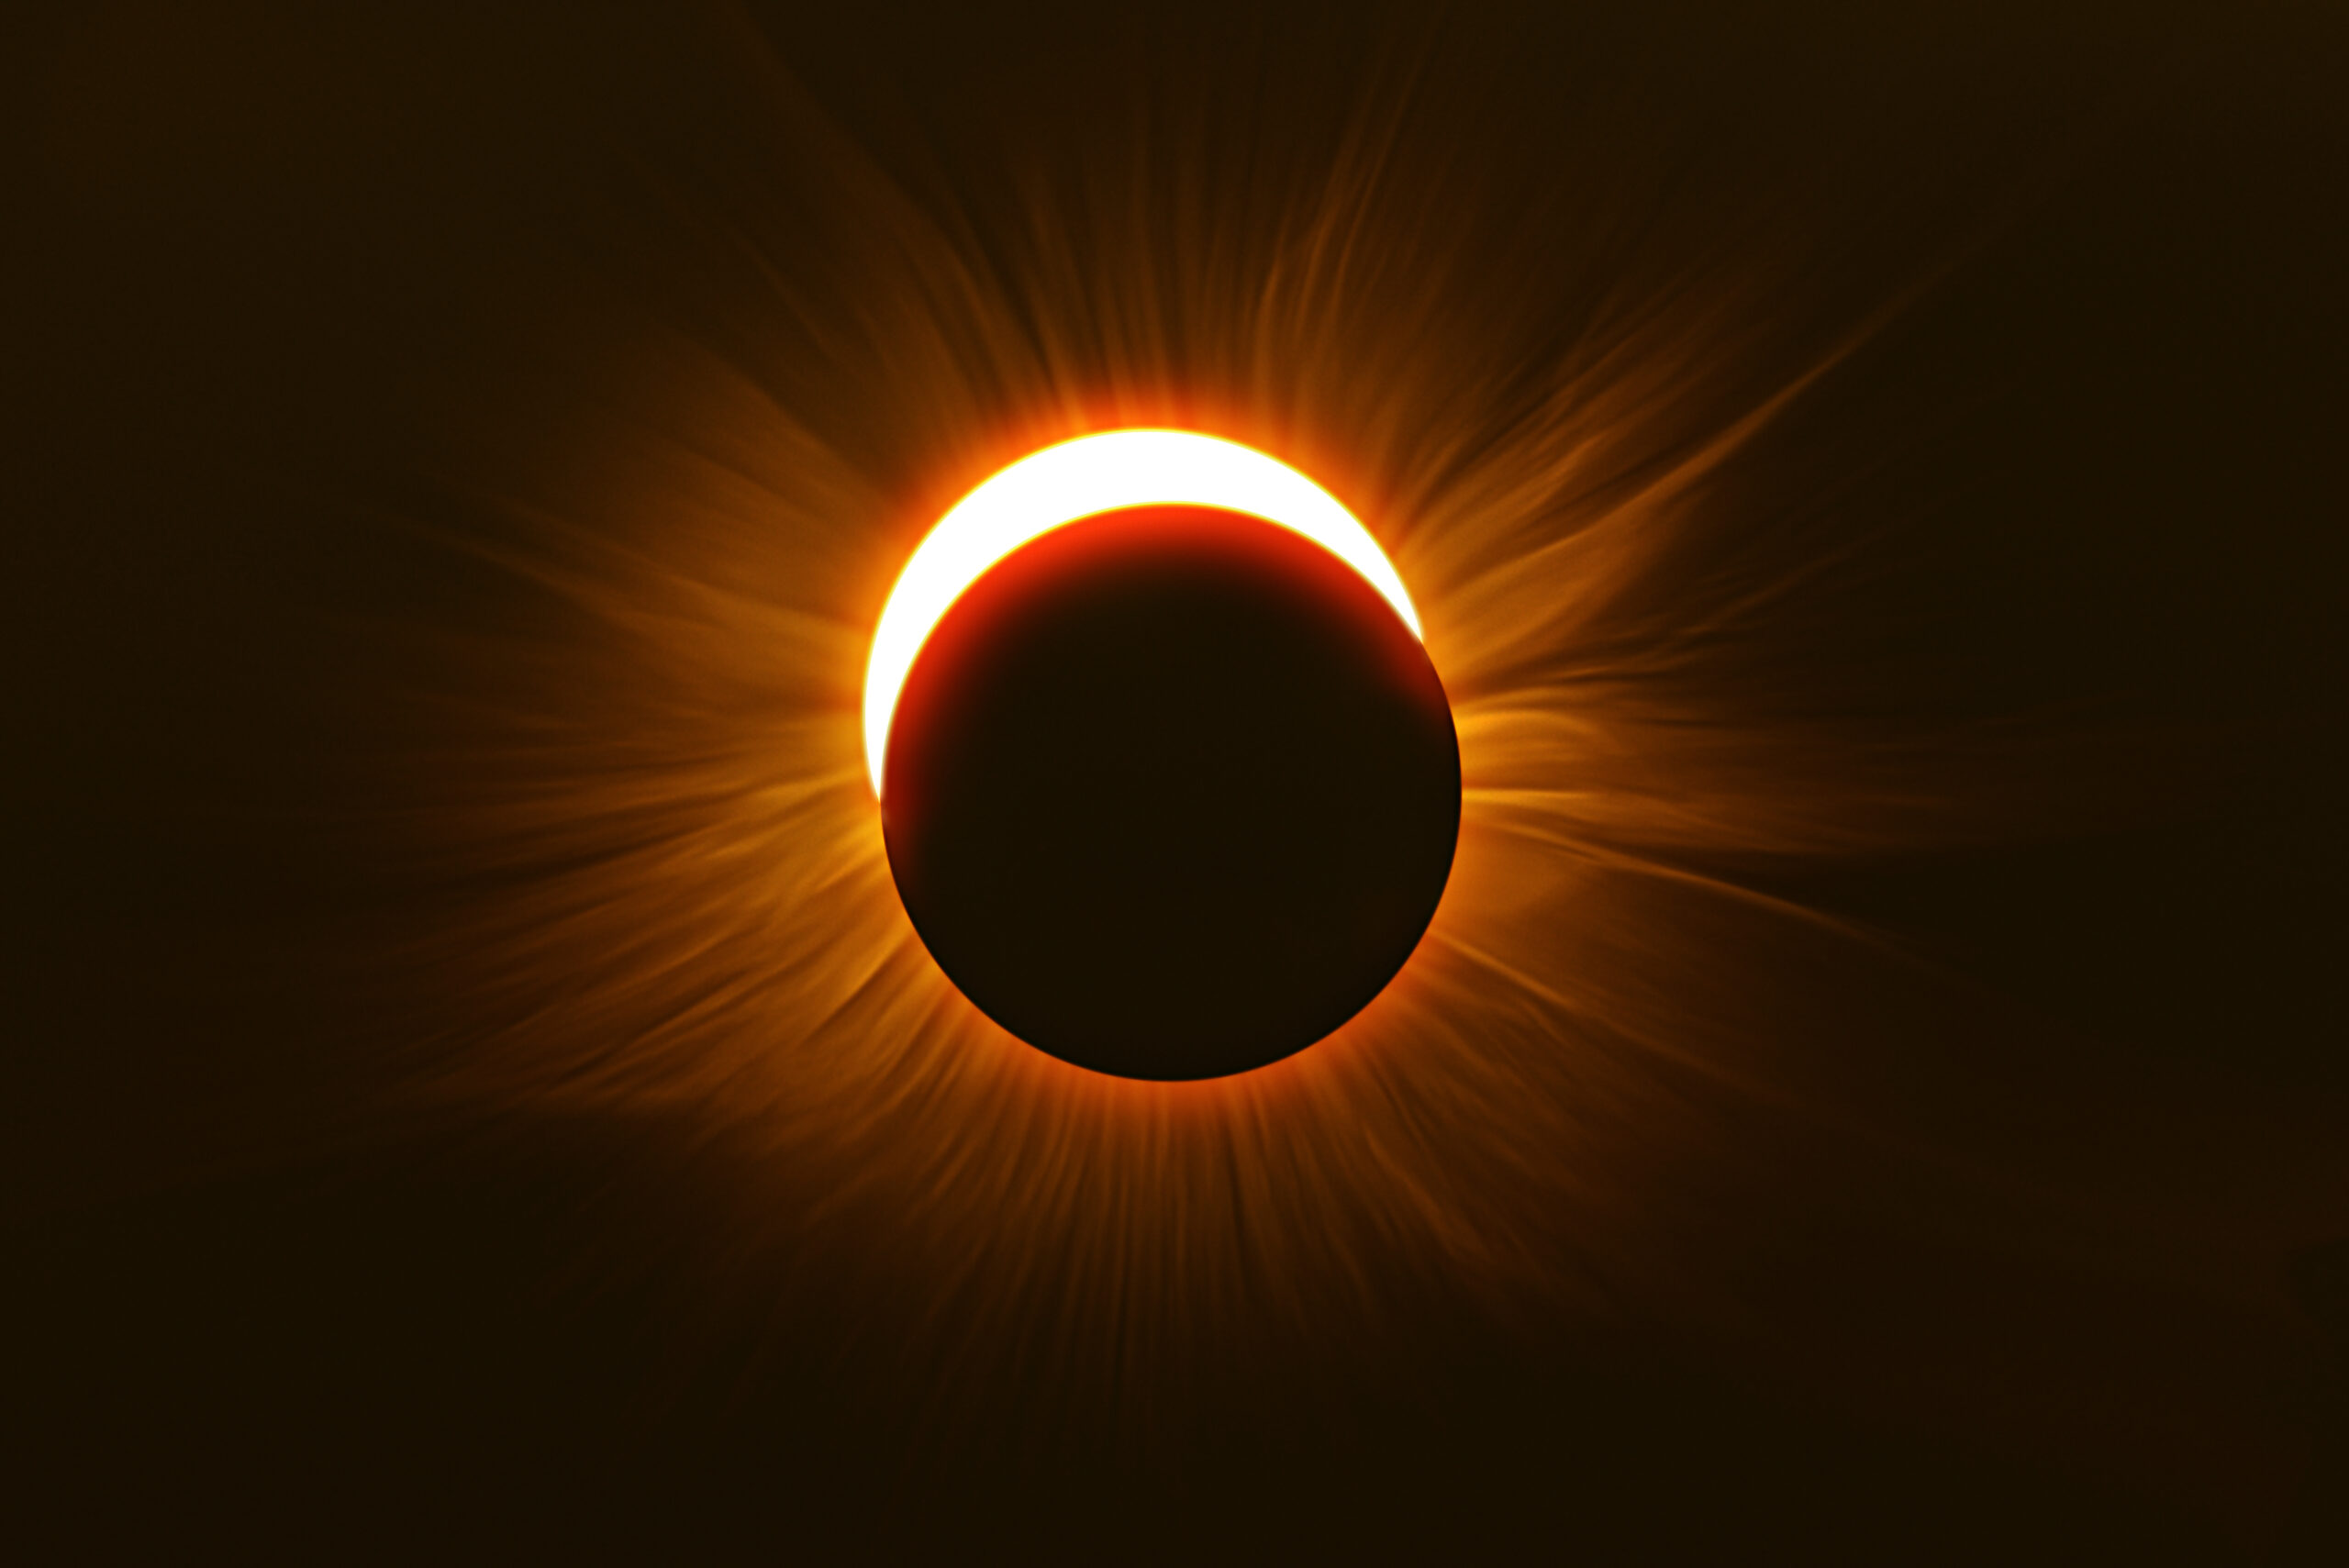 Solar eclipse August 21, 2017 at 1:15pm from Wisconsin, USA
85% Coverage